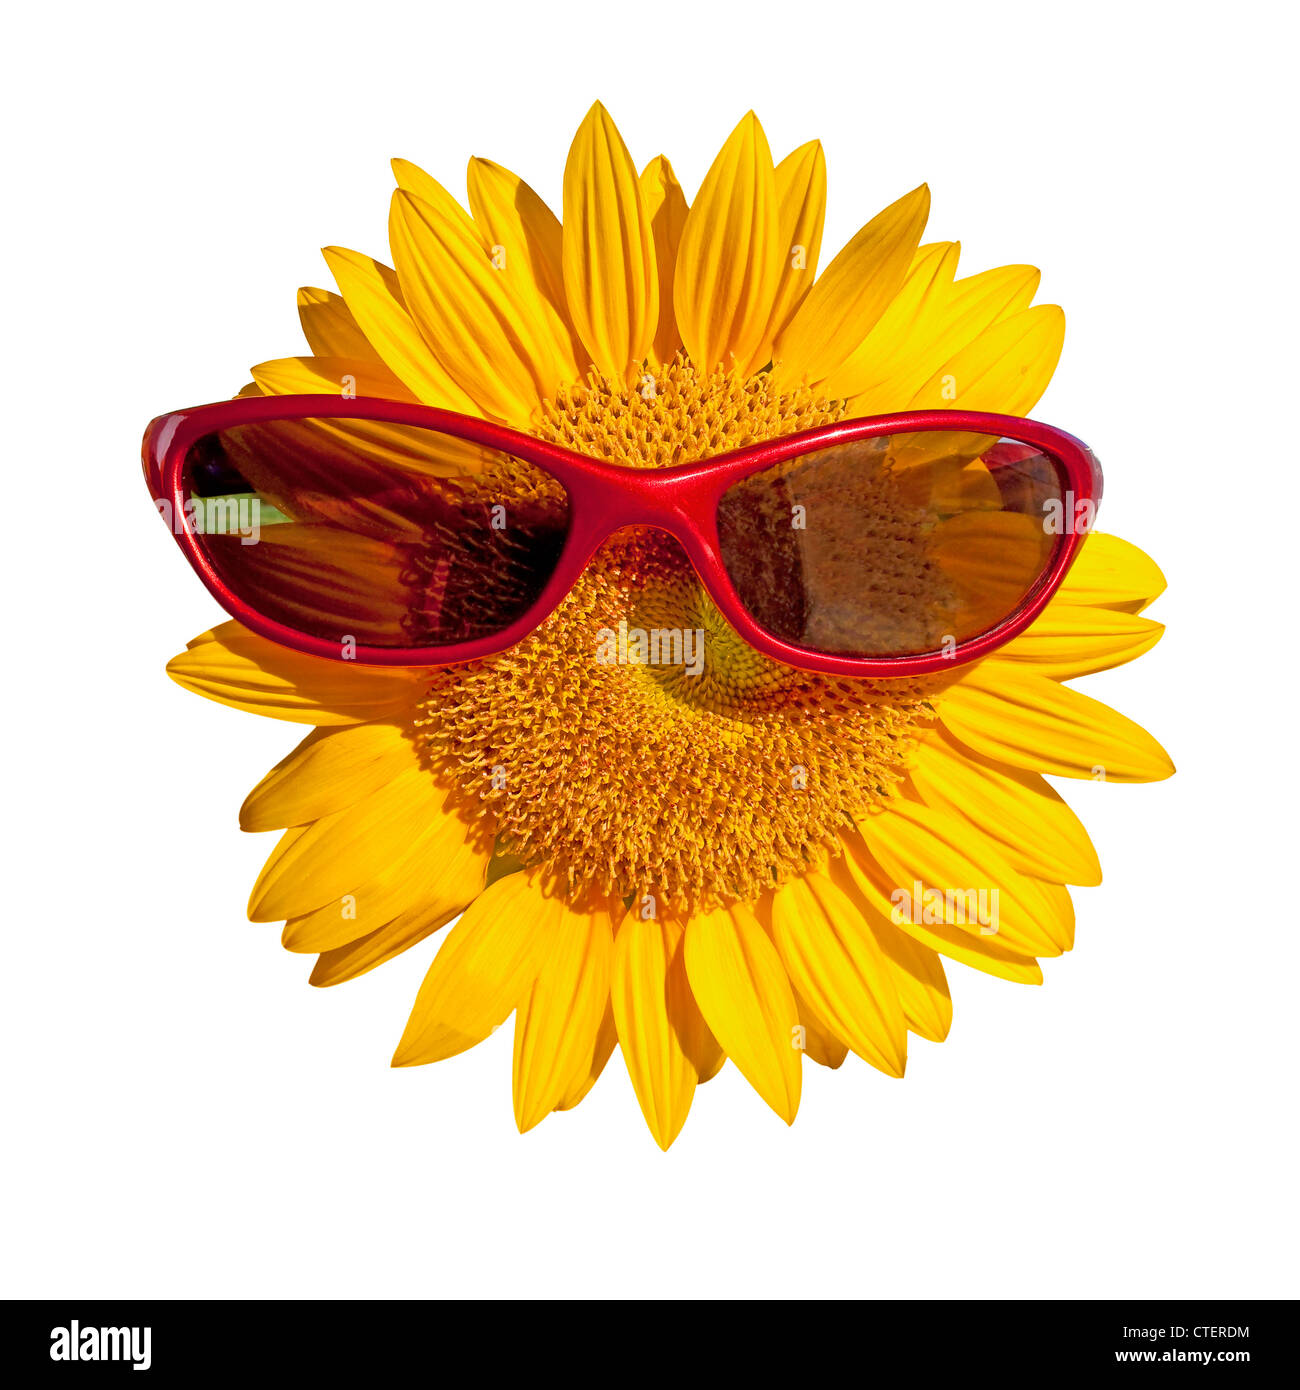 Sunflower wearing red sunglassed, isolated on white Stock Photo